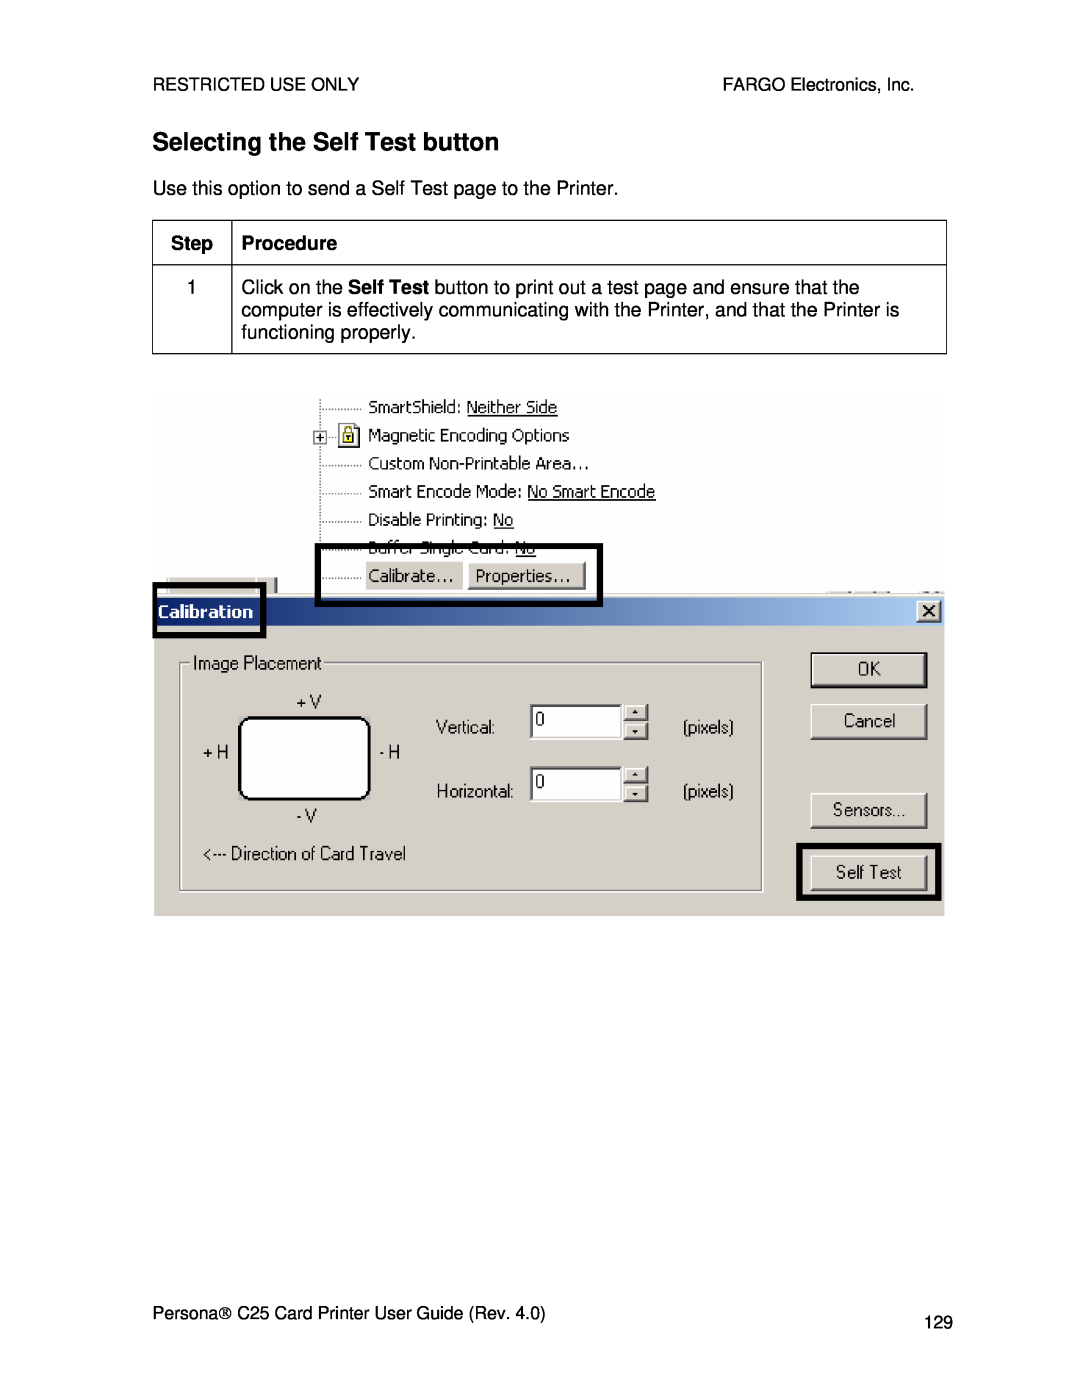 FARGO electronic S000256 manual Selecting the Self Test button, Use this option to send a Self Test page to the Printer 